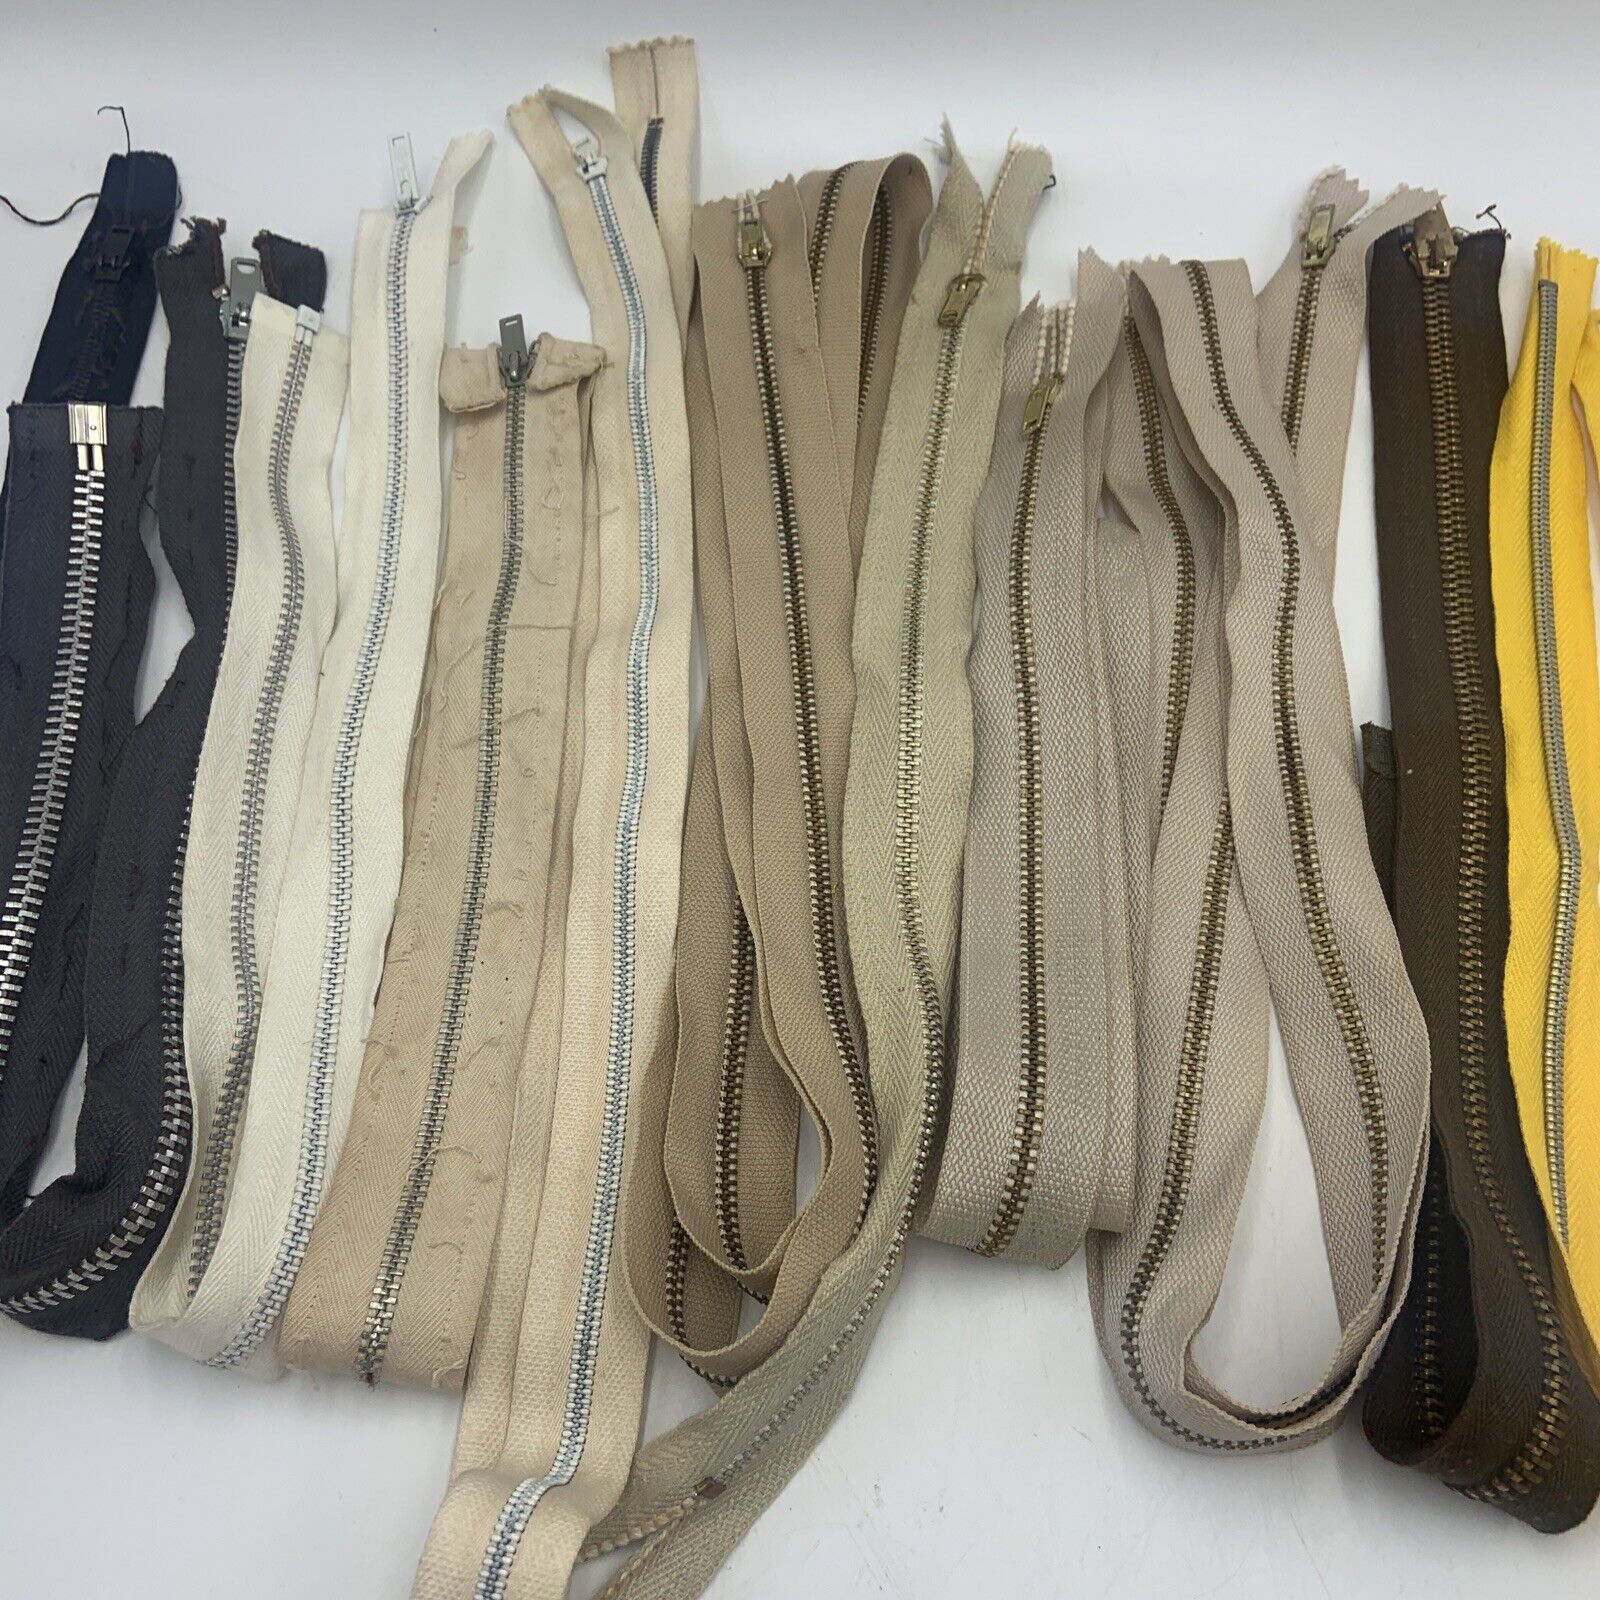 Vintage METAL ZIPPERS Mixed Lot of 12 Variety of LENGTHS 10